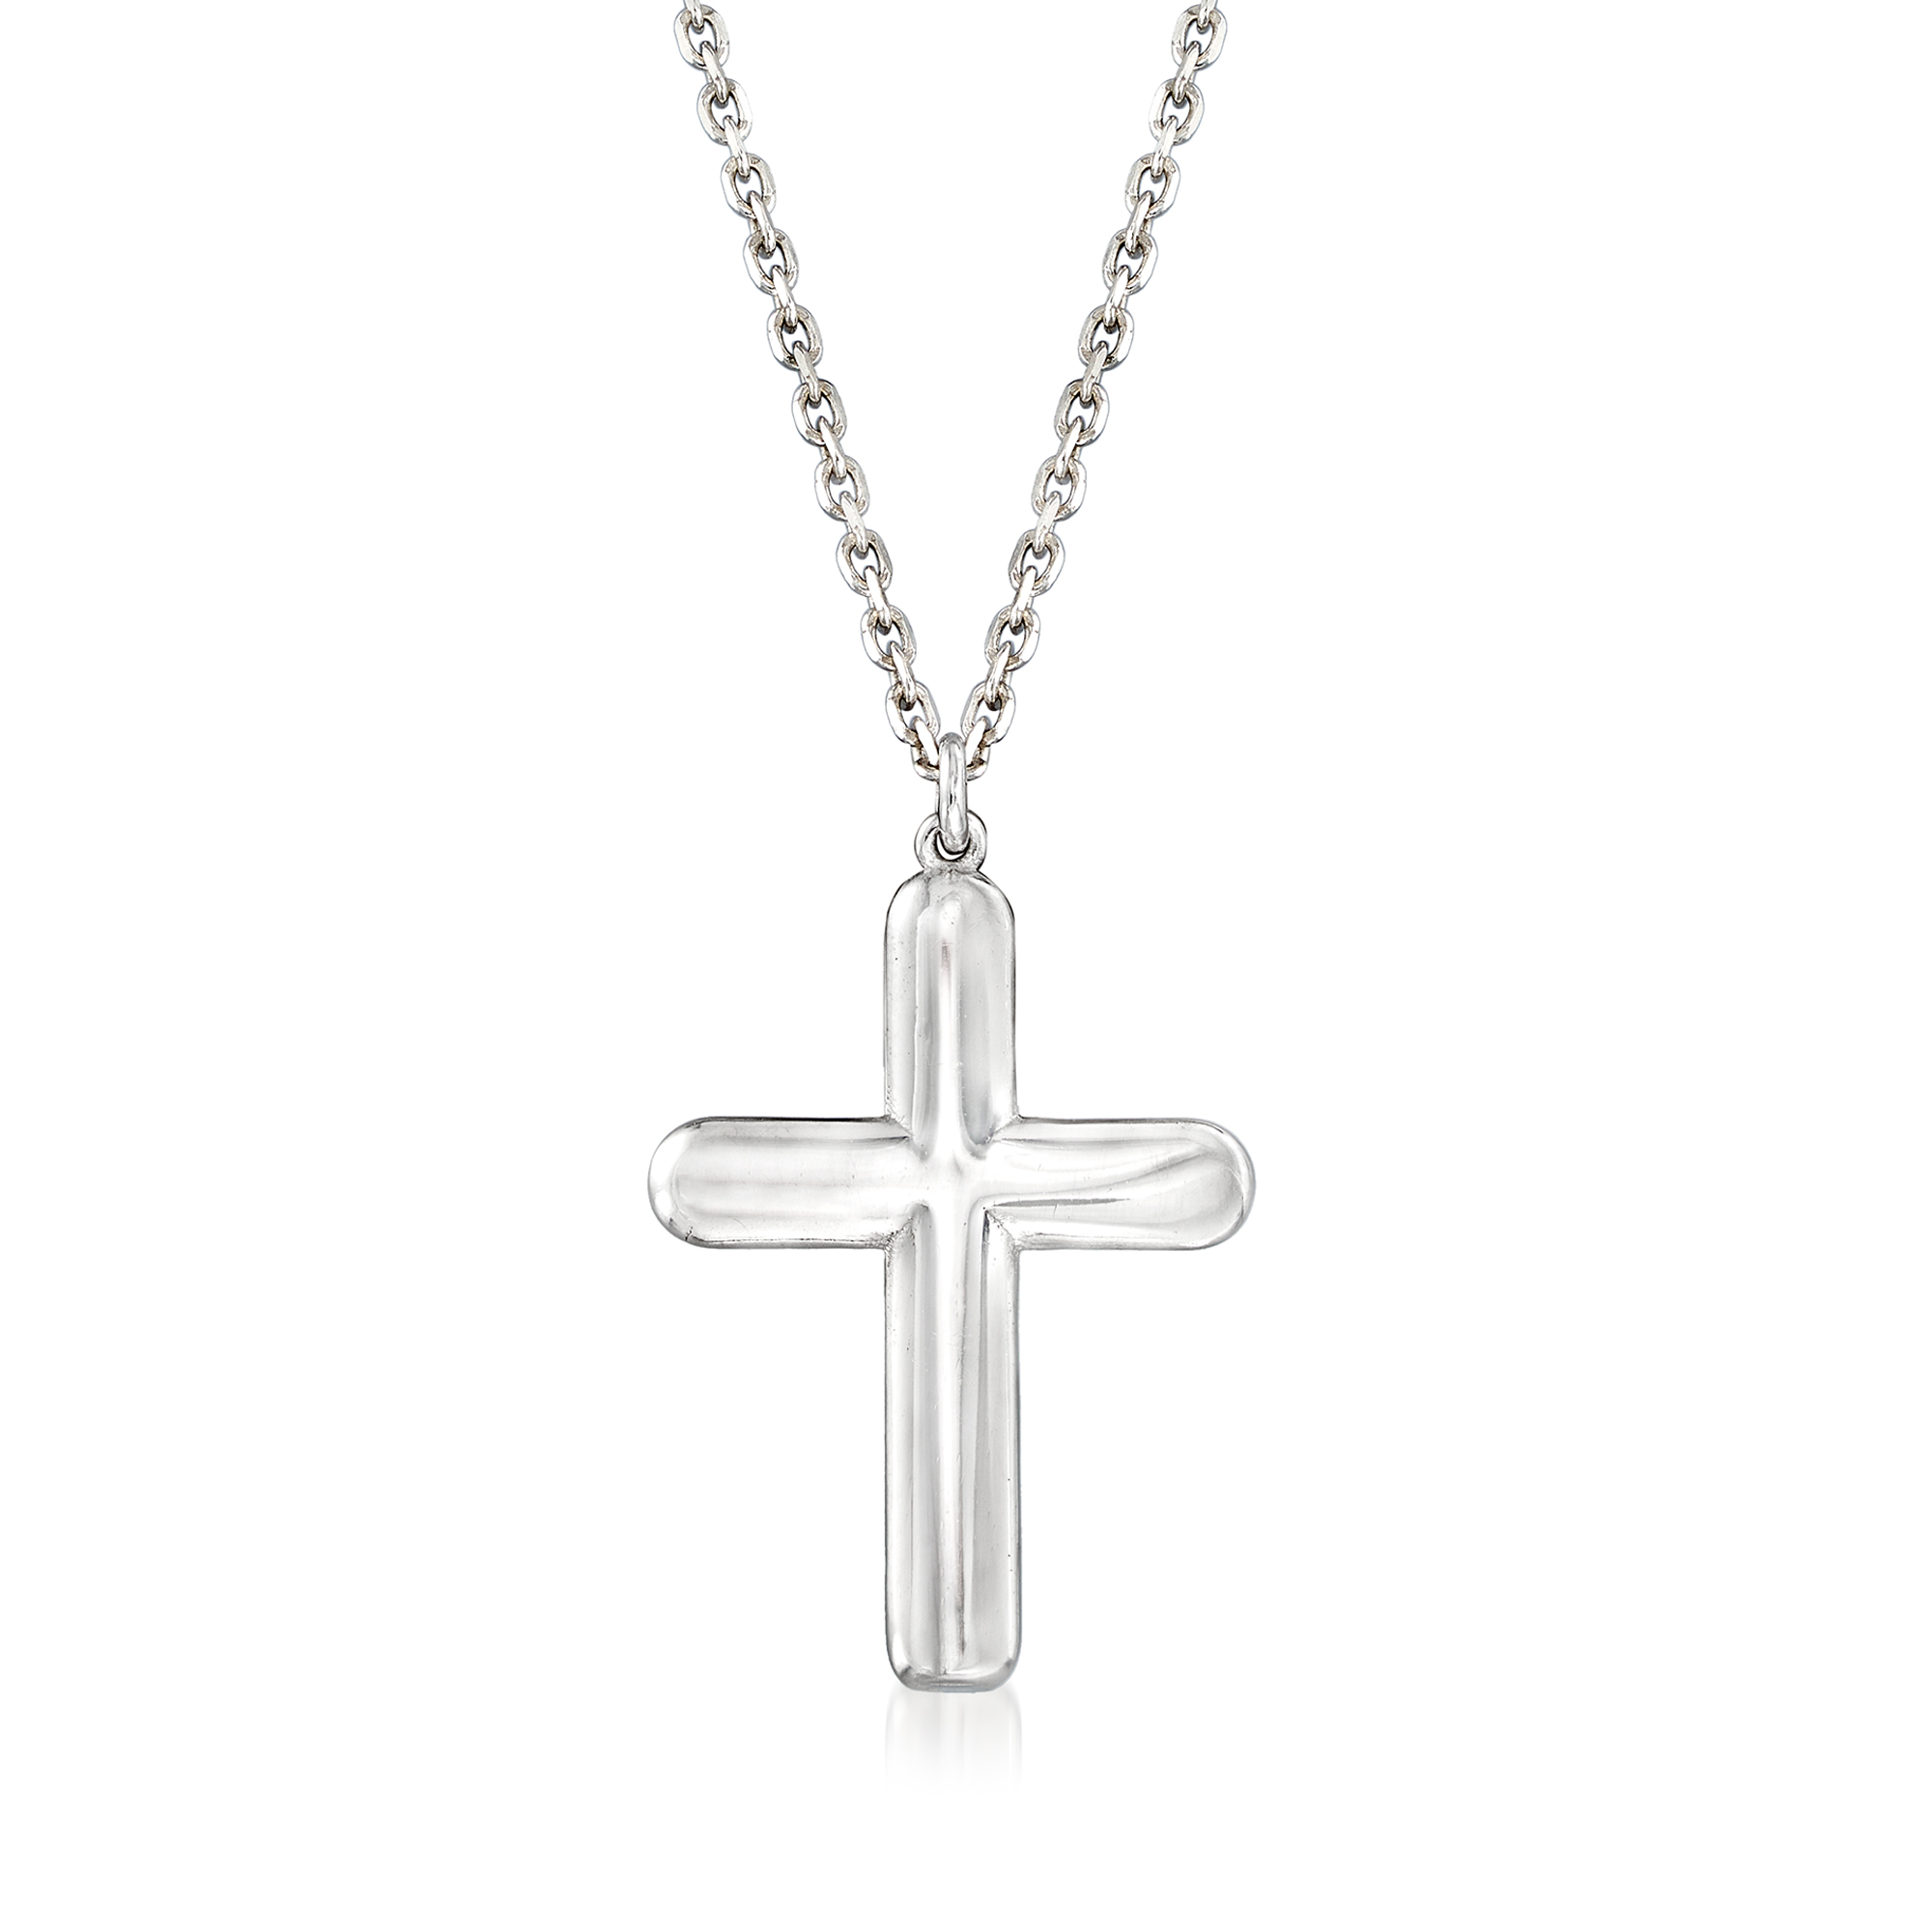 Sterling Silver Shiny Polished Edged Italian Cross Charm Pendant Necklace 